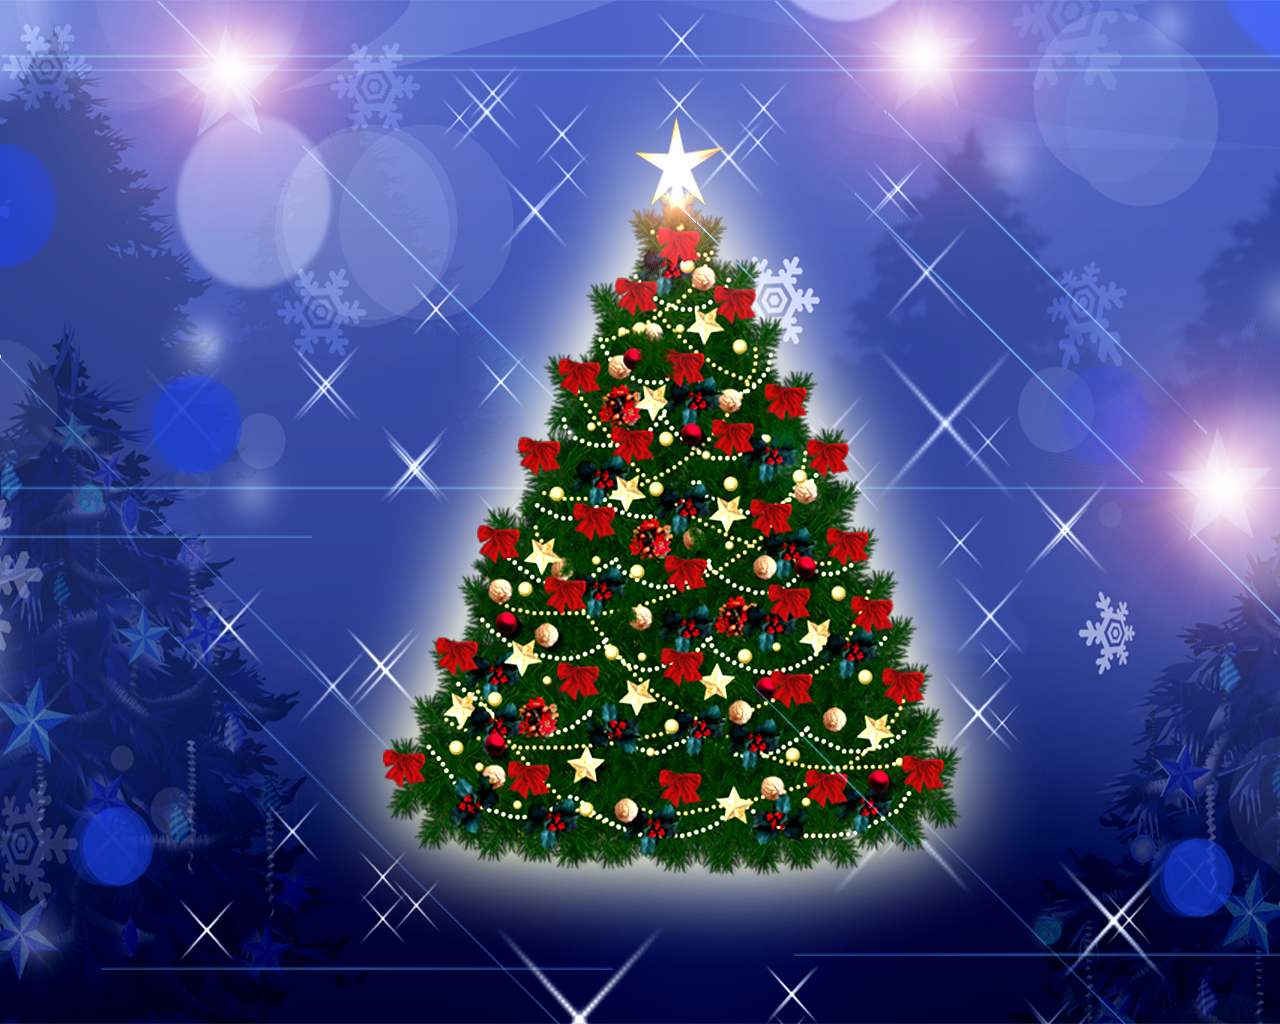 Christmas Wallpapers and Images and Photos